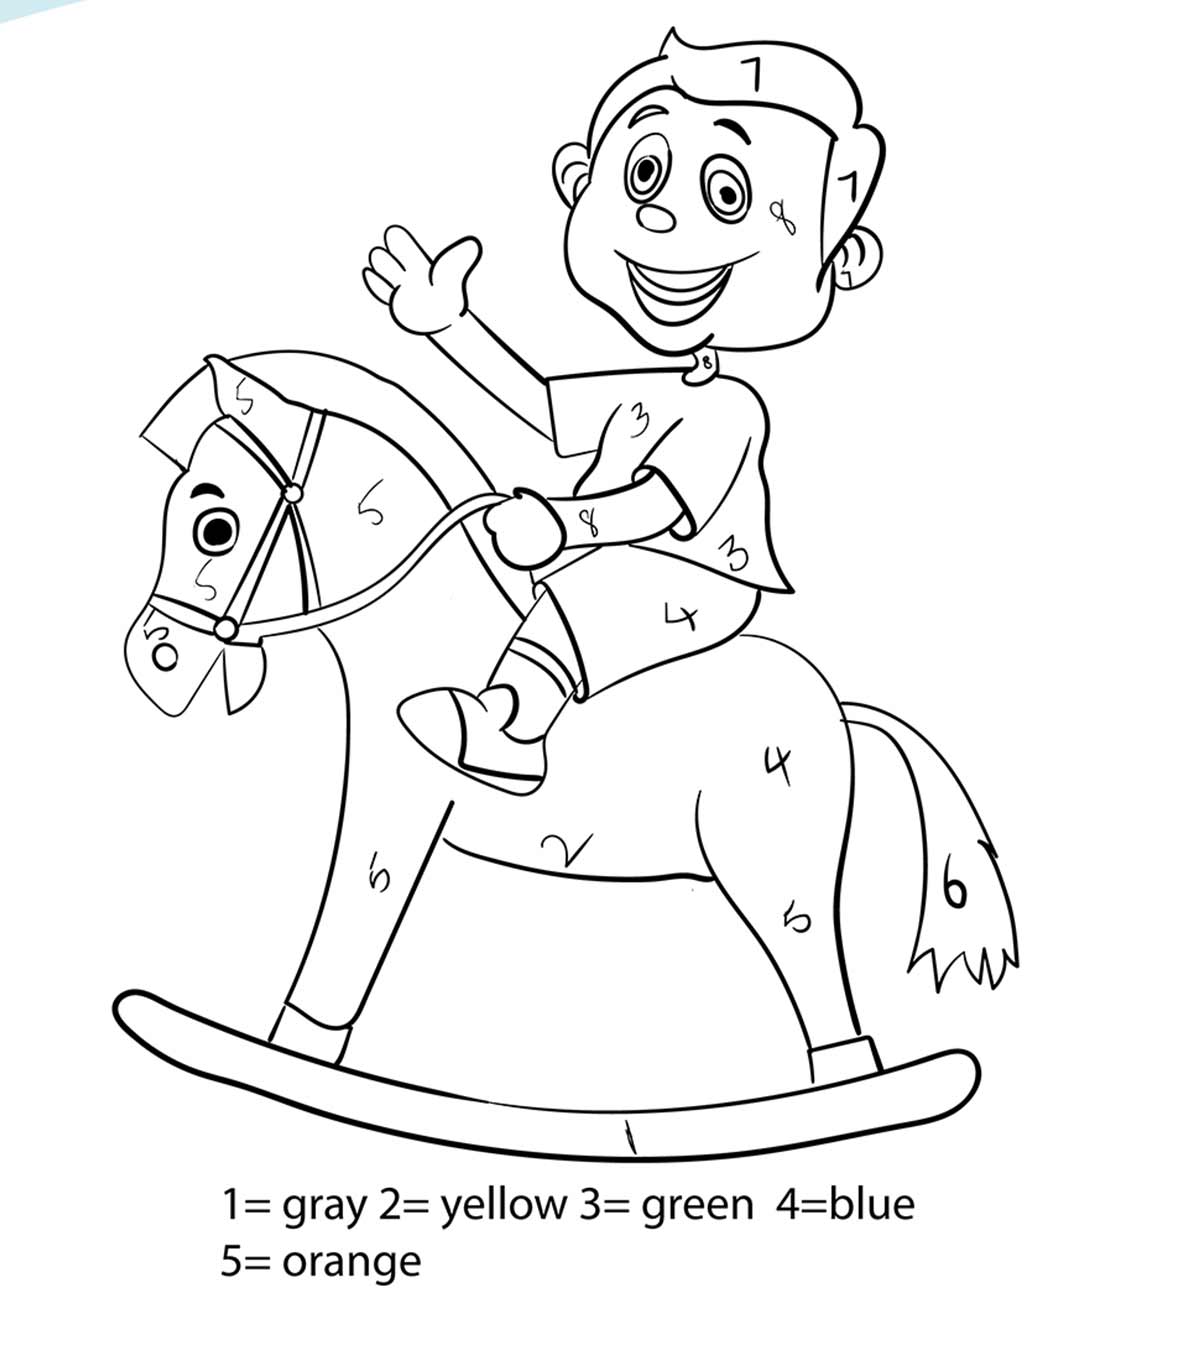 Top 10 Color By Number Coloring Pages